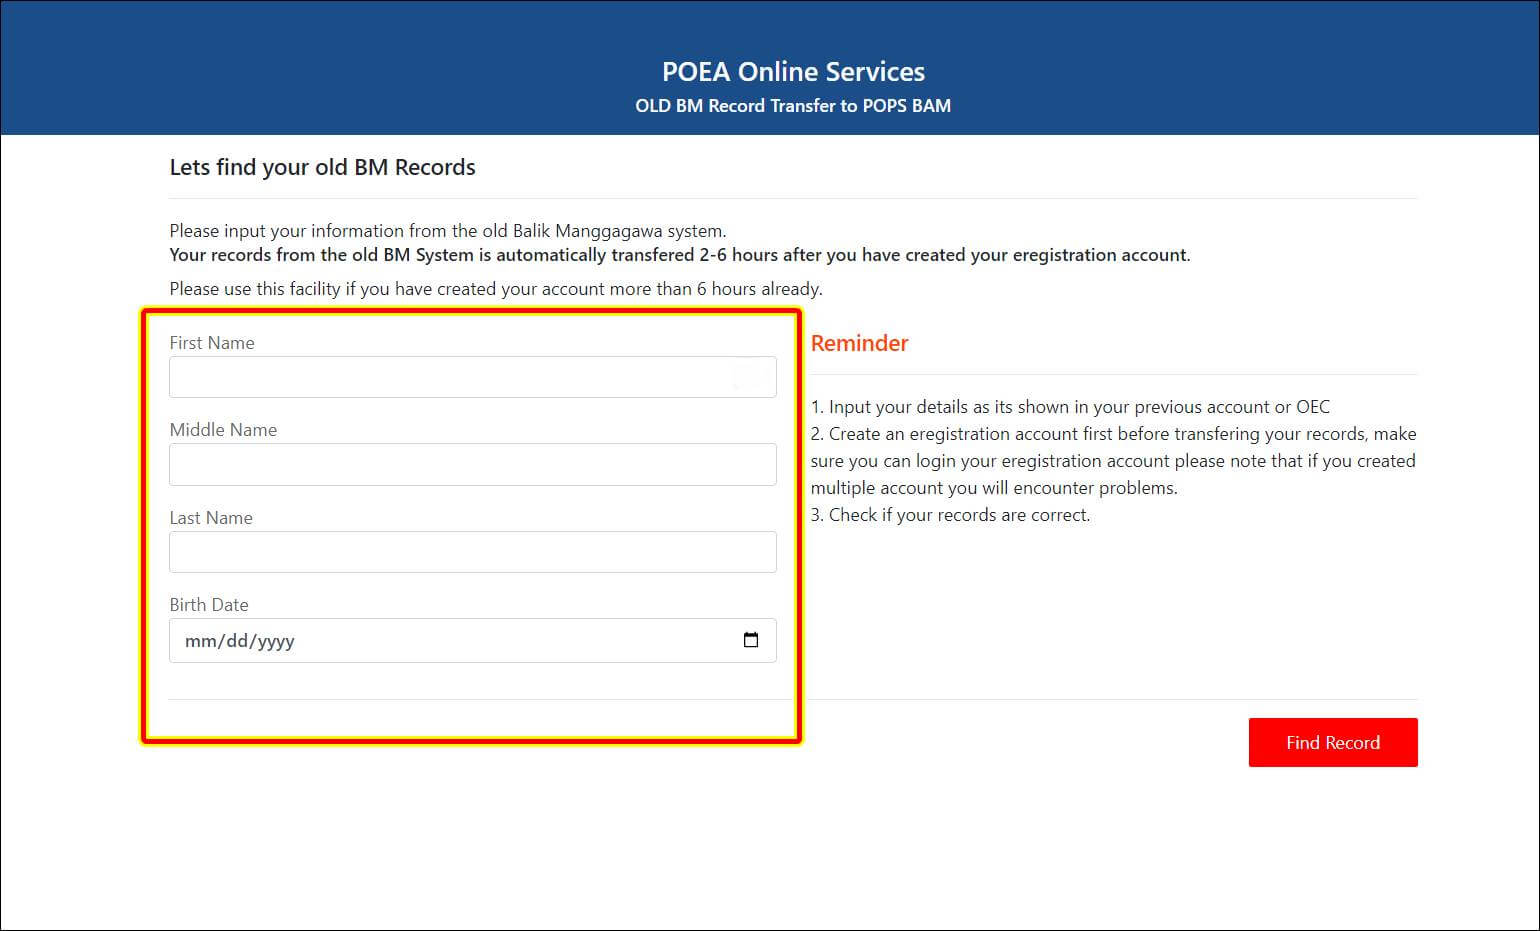 how to transfer bm online records to pops-bam poea system